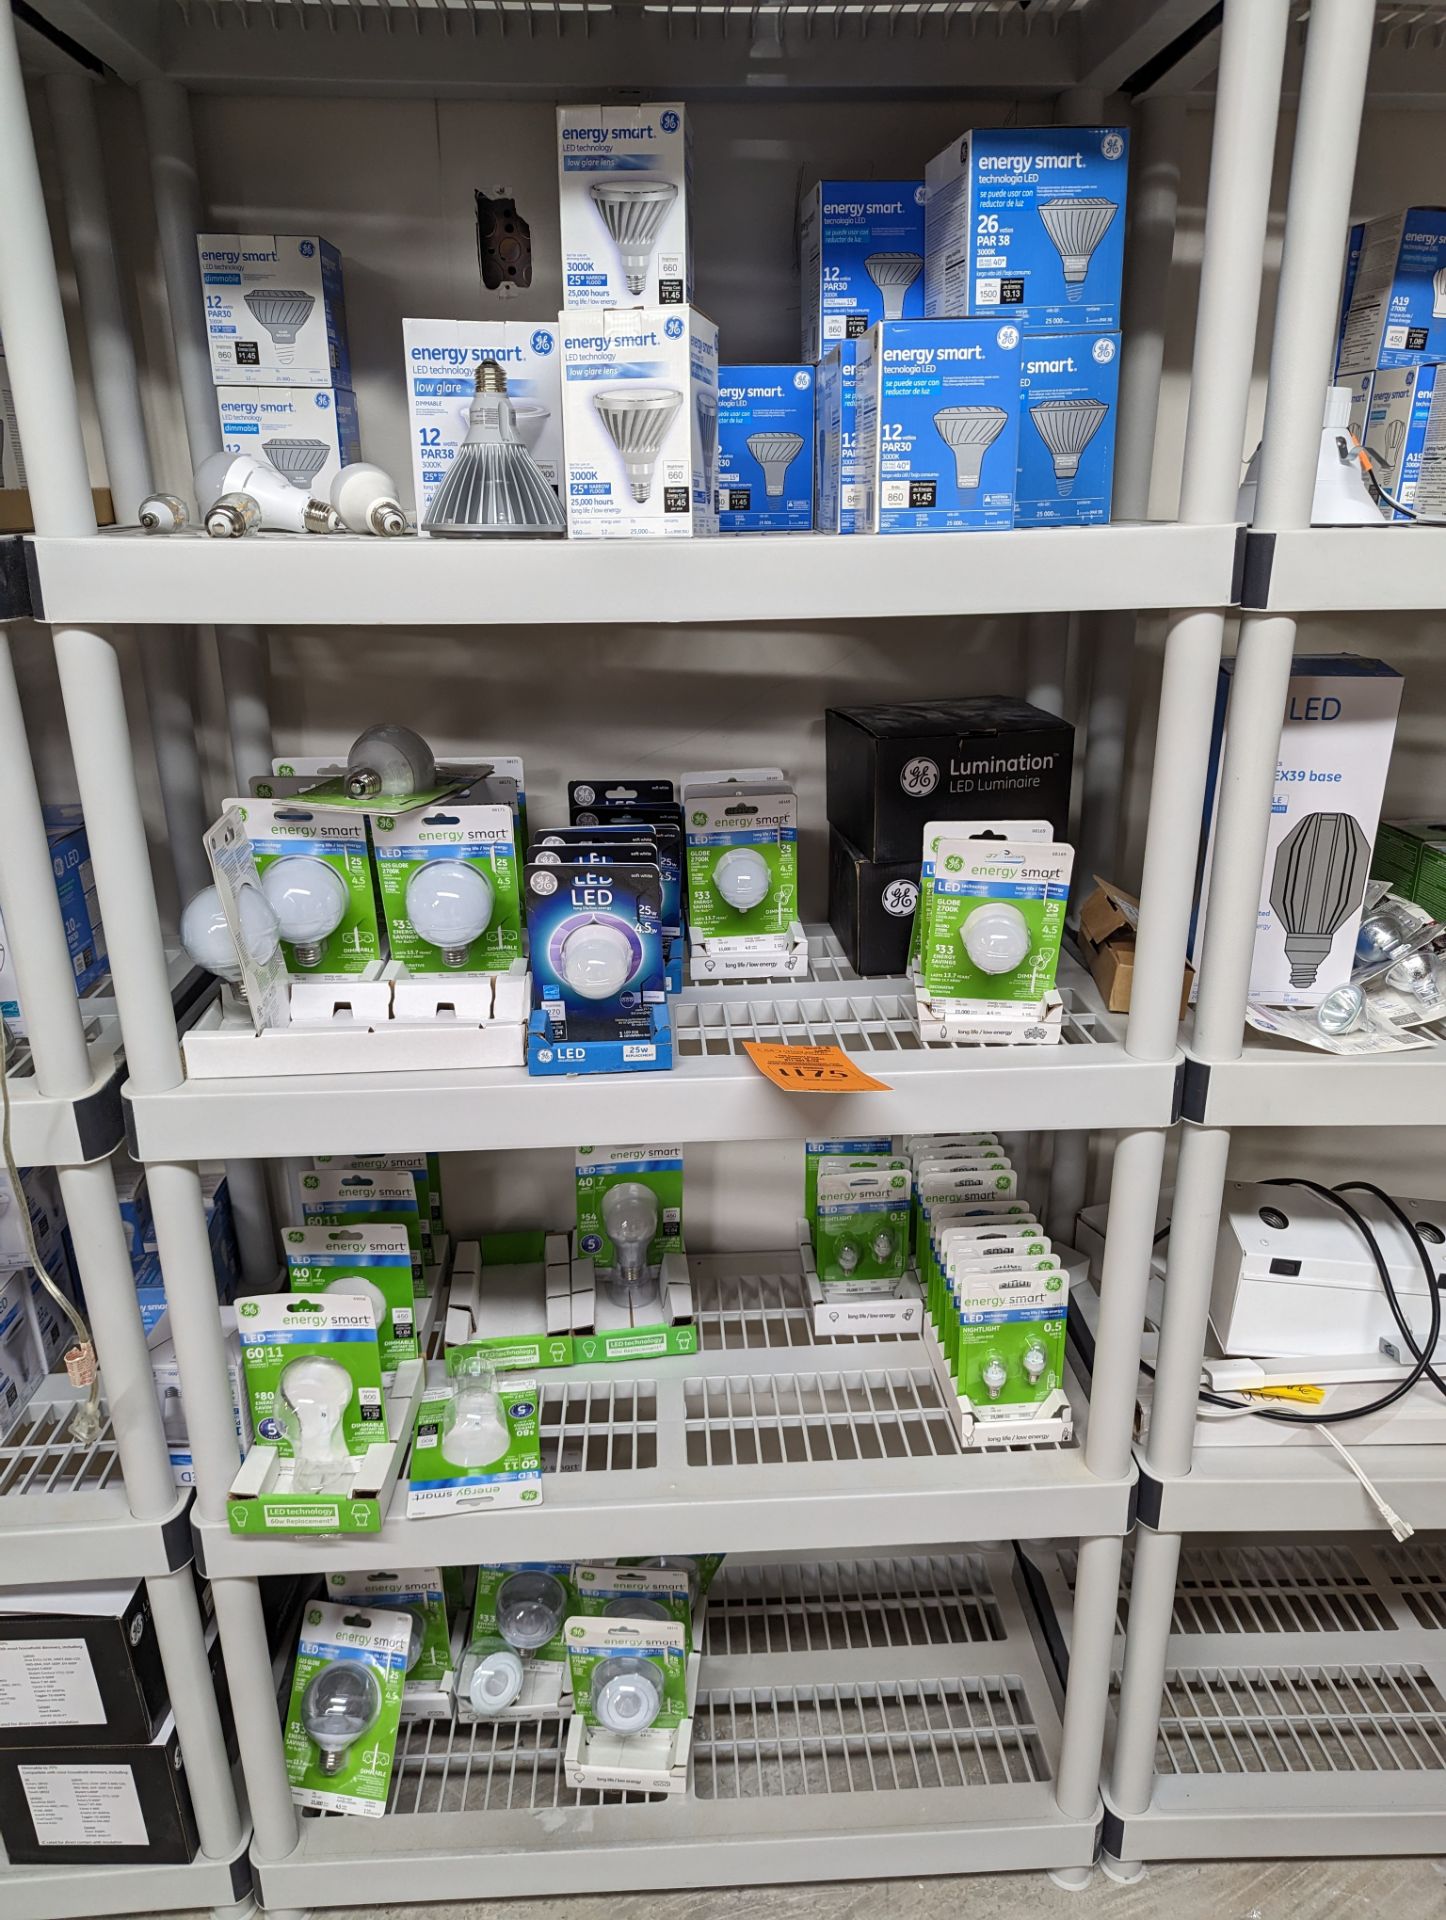 PLASTIC RACK AND CONTENTS: VARIOUS LED BULBS